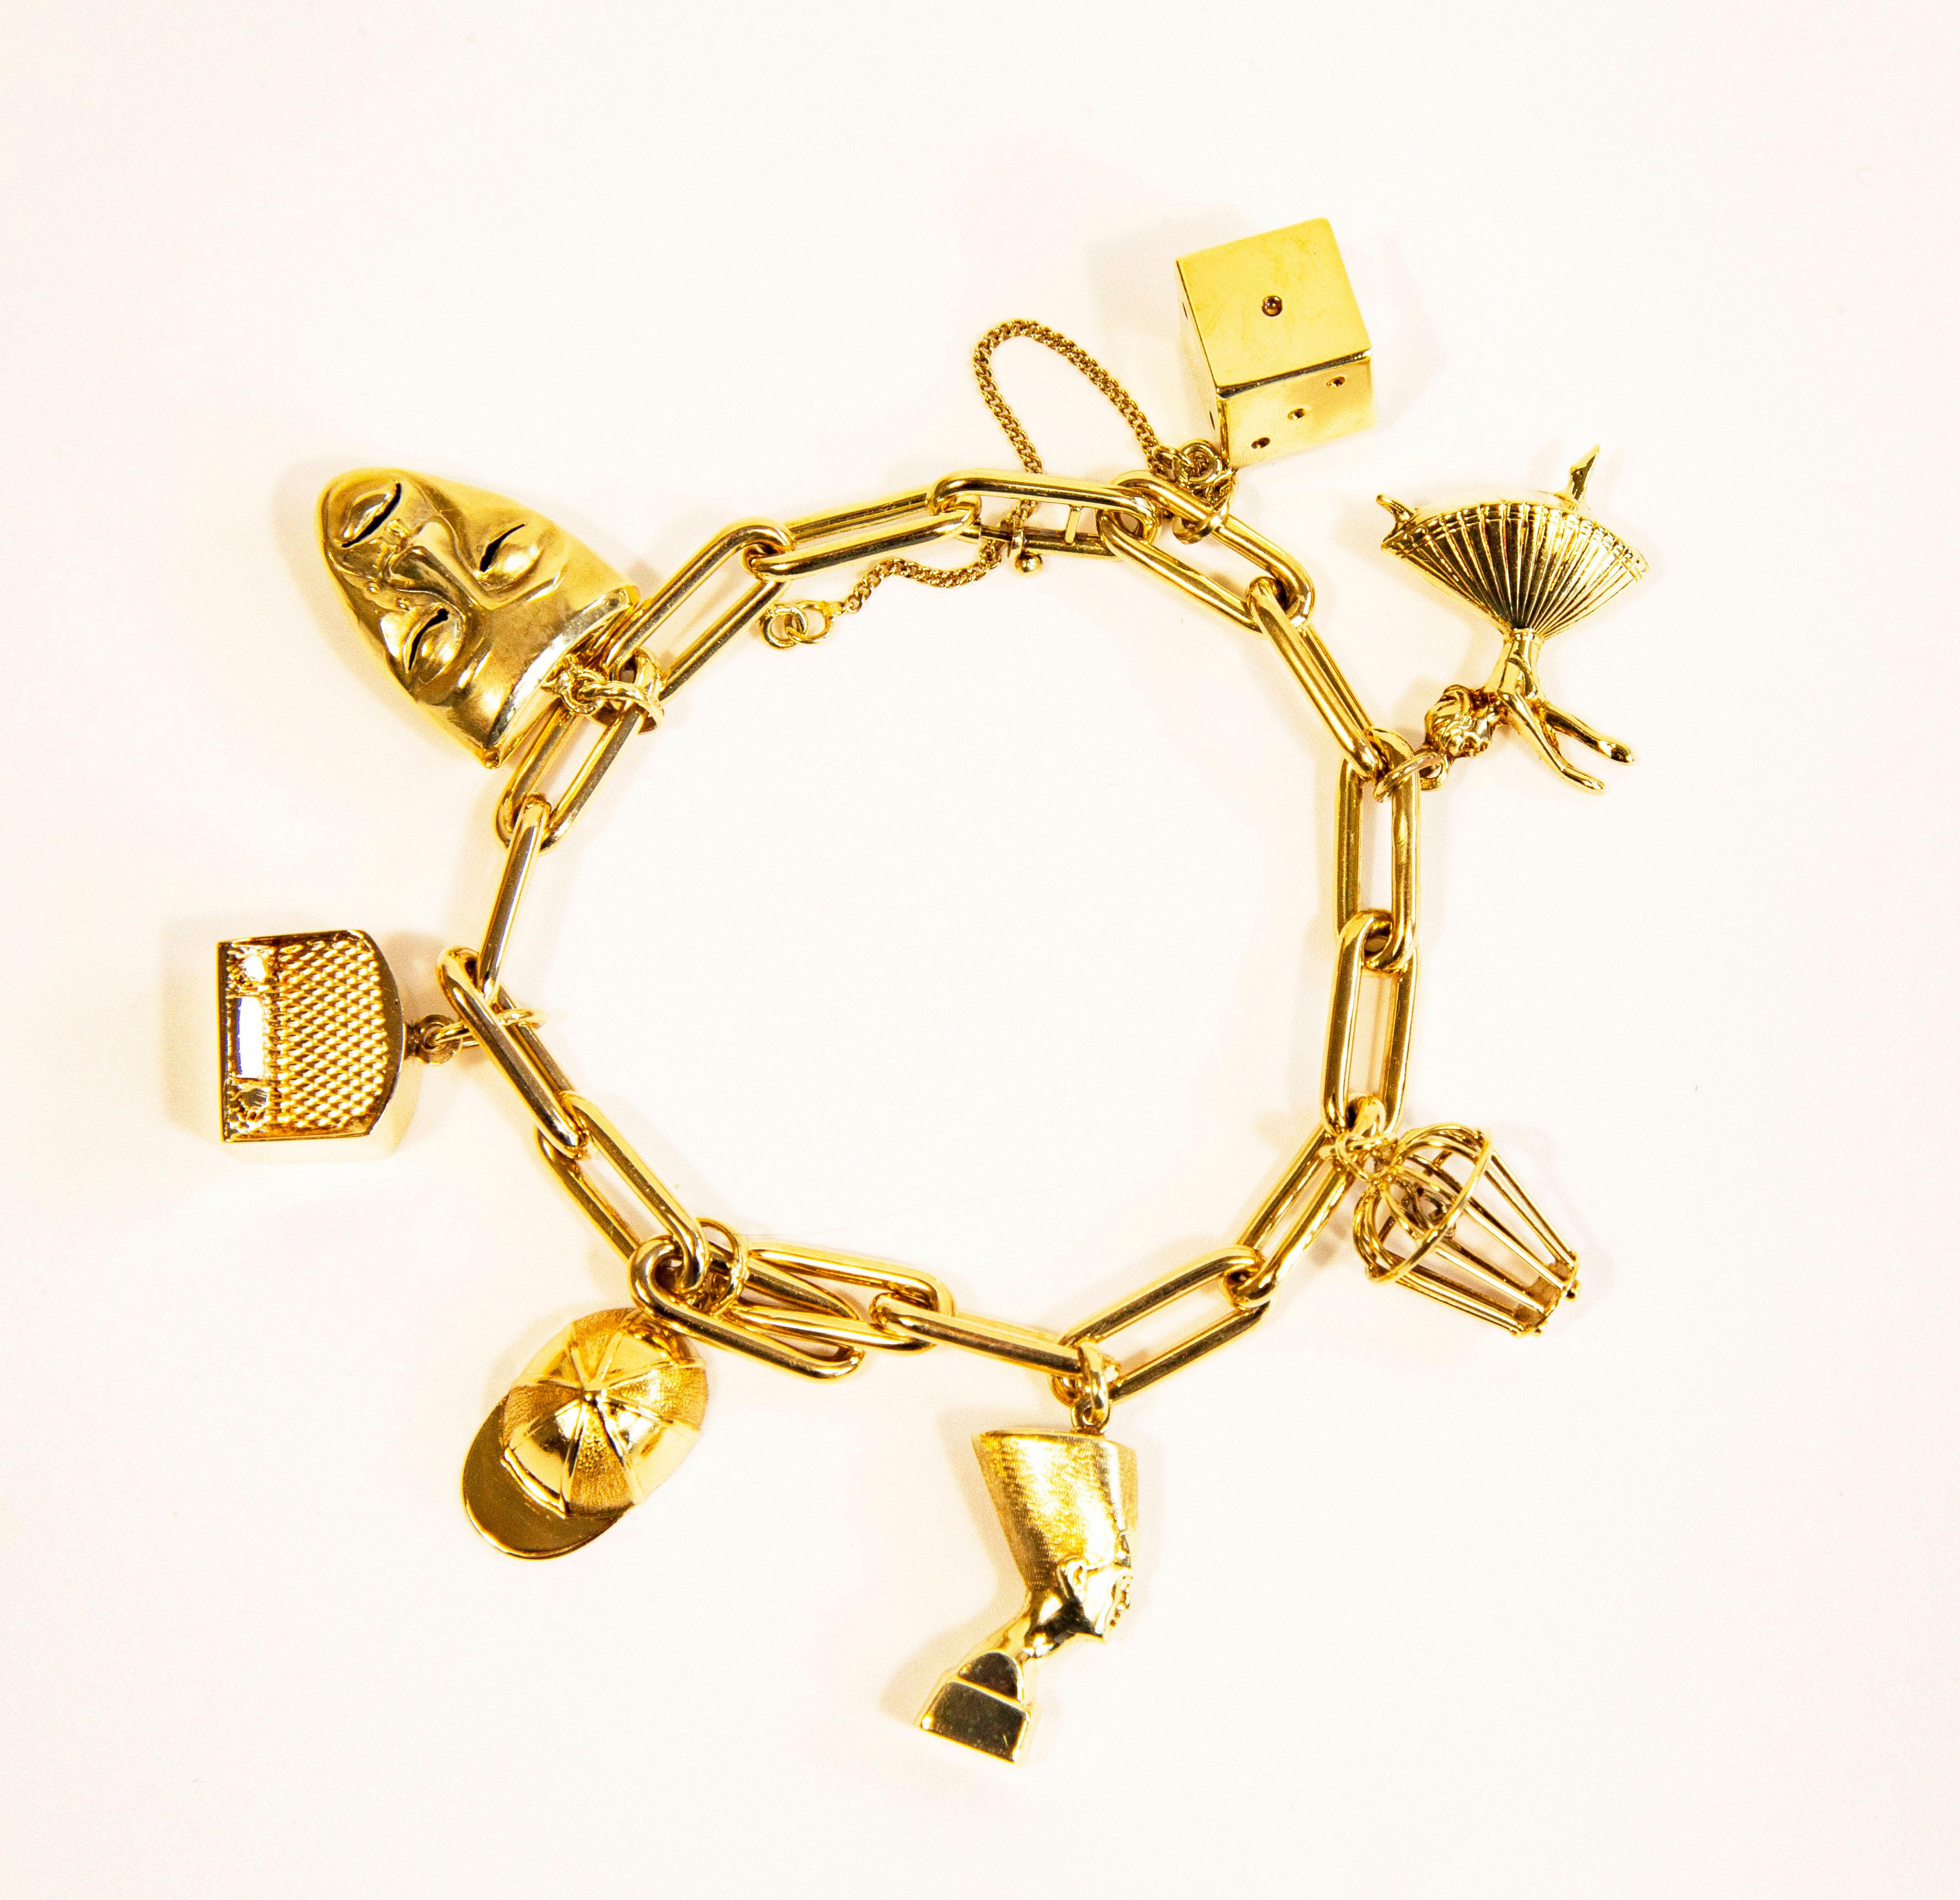 A vintage 14 karat yellow gold chain bracelet with 7 charms, including a dice, a ballerina, a closed basket/cage with a heart inside, Nefertiti, a cap, a radio, and an actor's mask. The bracelet features a safety chain attached to the distal links.